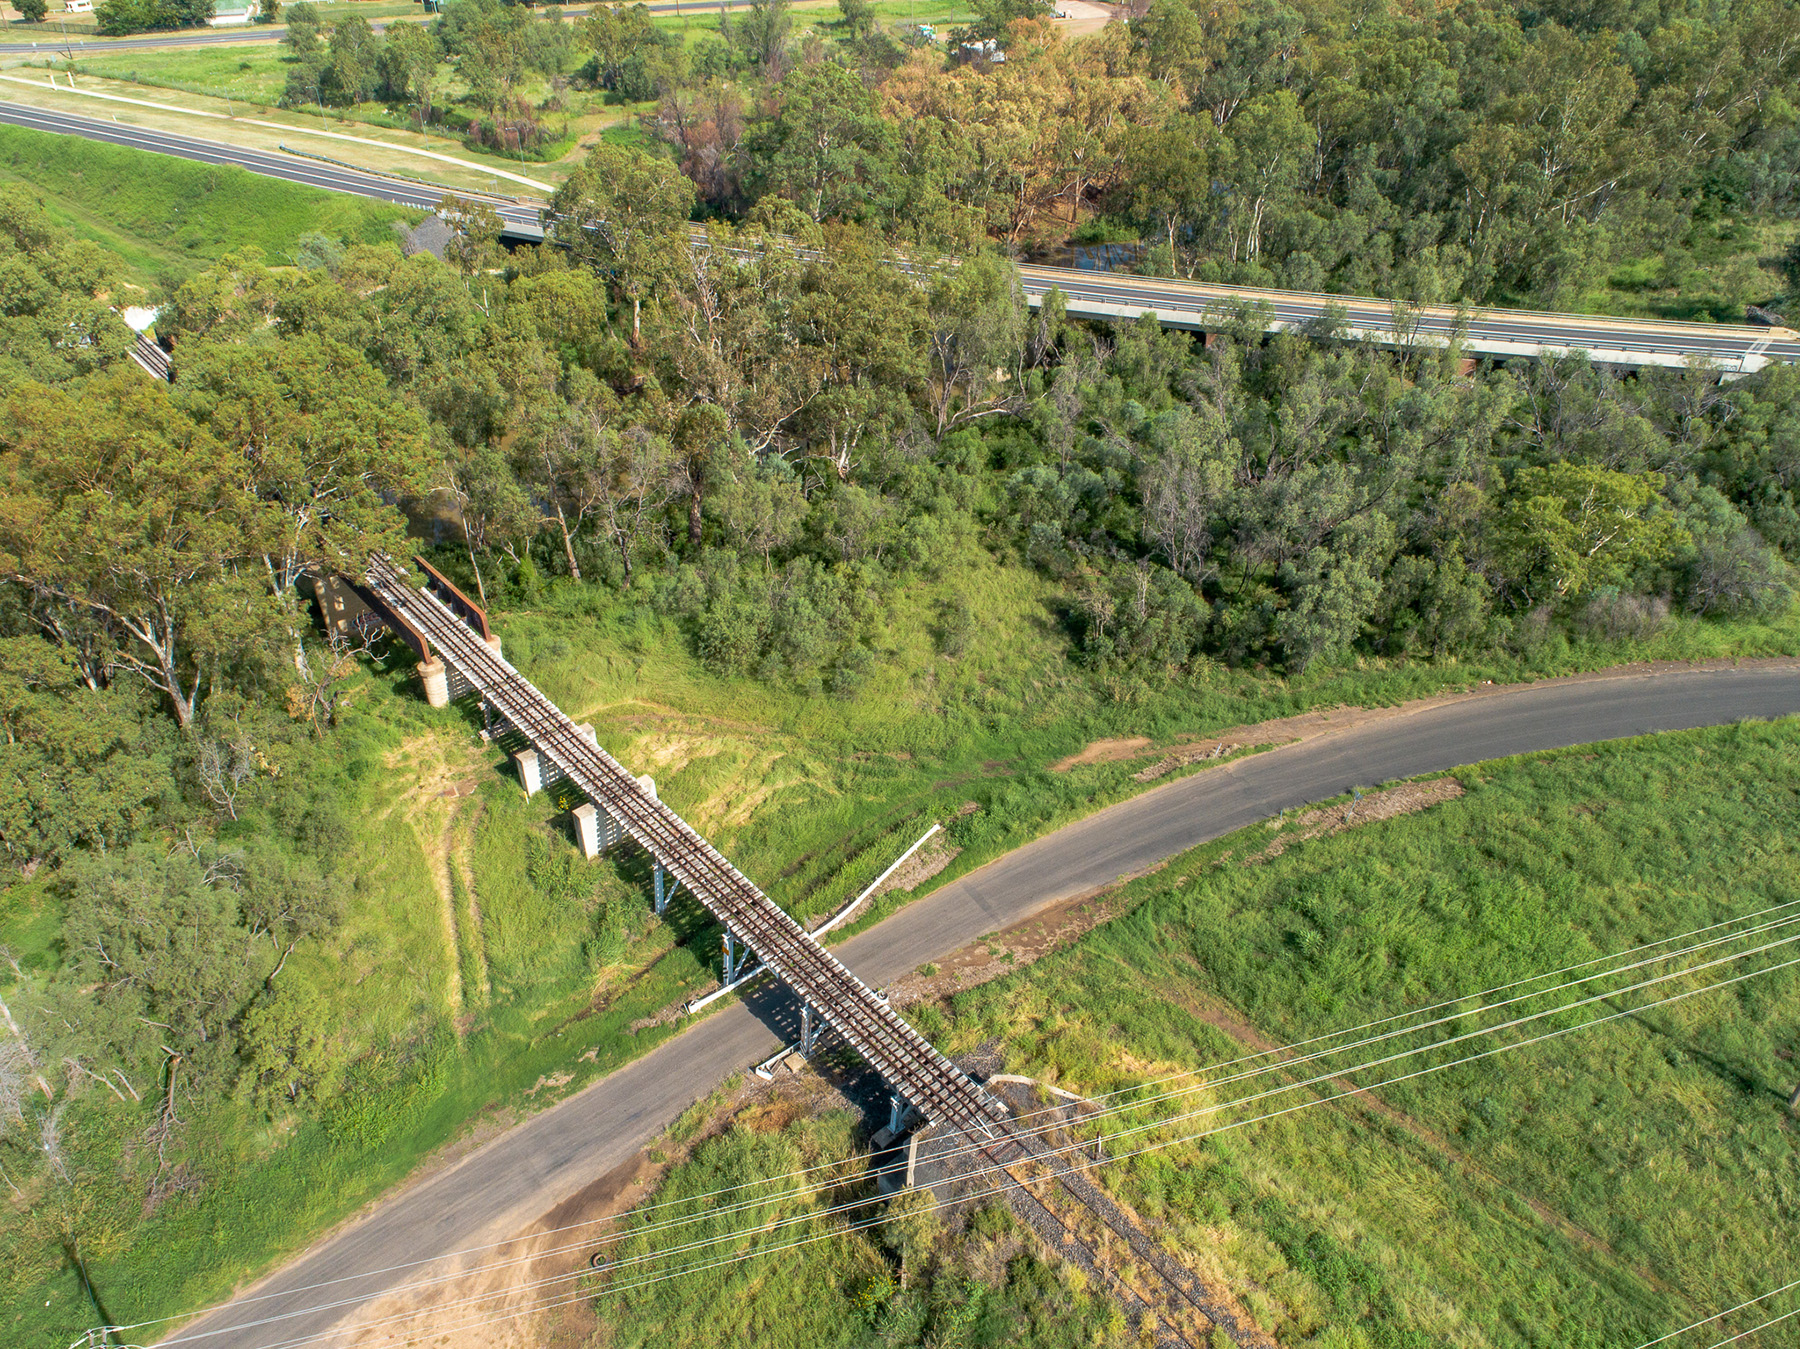 Aerial image of a rail bridge passing over a road.